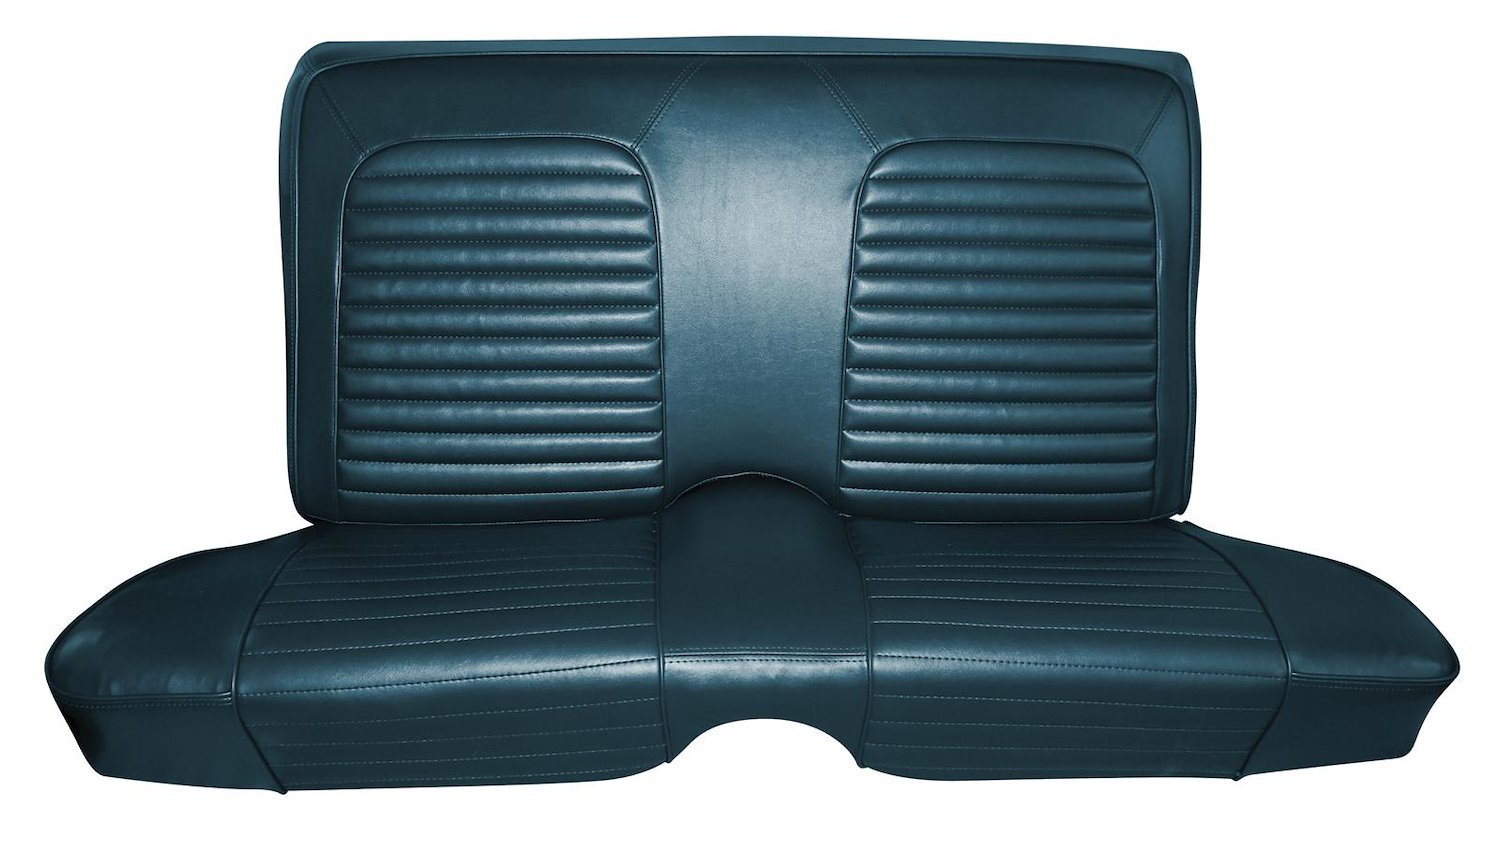 1967 Chevrolet Impala and Super Sport Coupe Interior Rear Bench Seat Upholstery Set